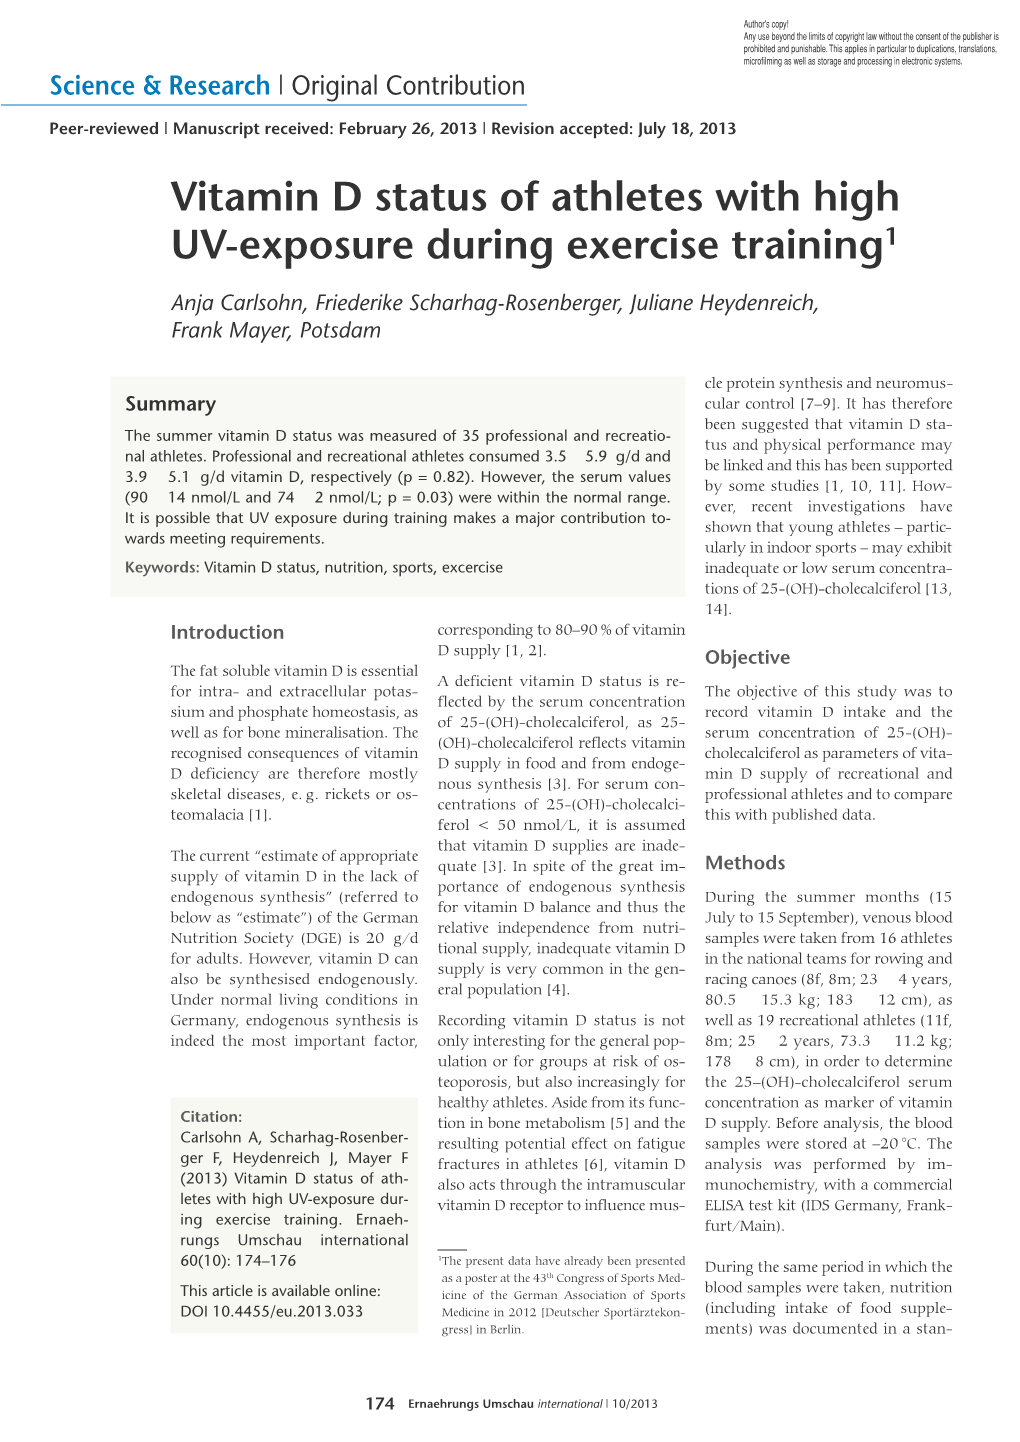 Vitamin D Status of Athletes with High UV-Exposure During Exercise Training1